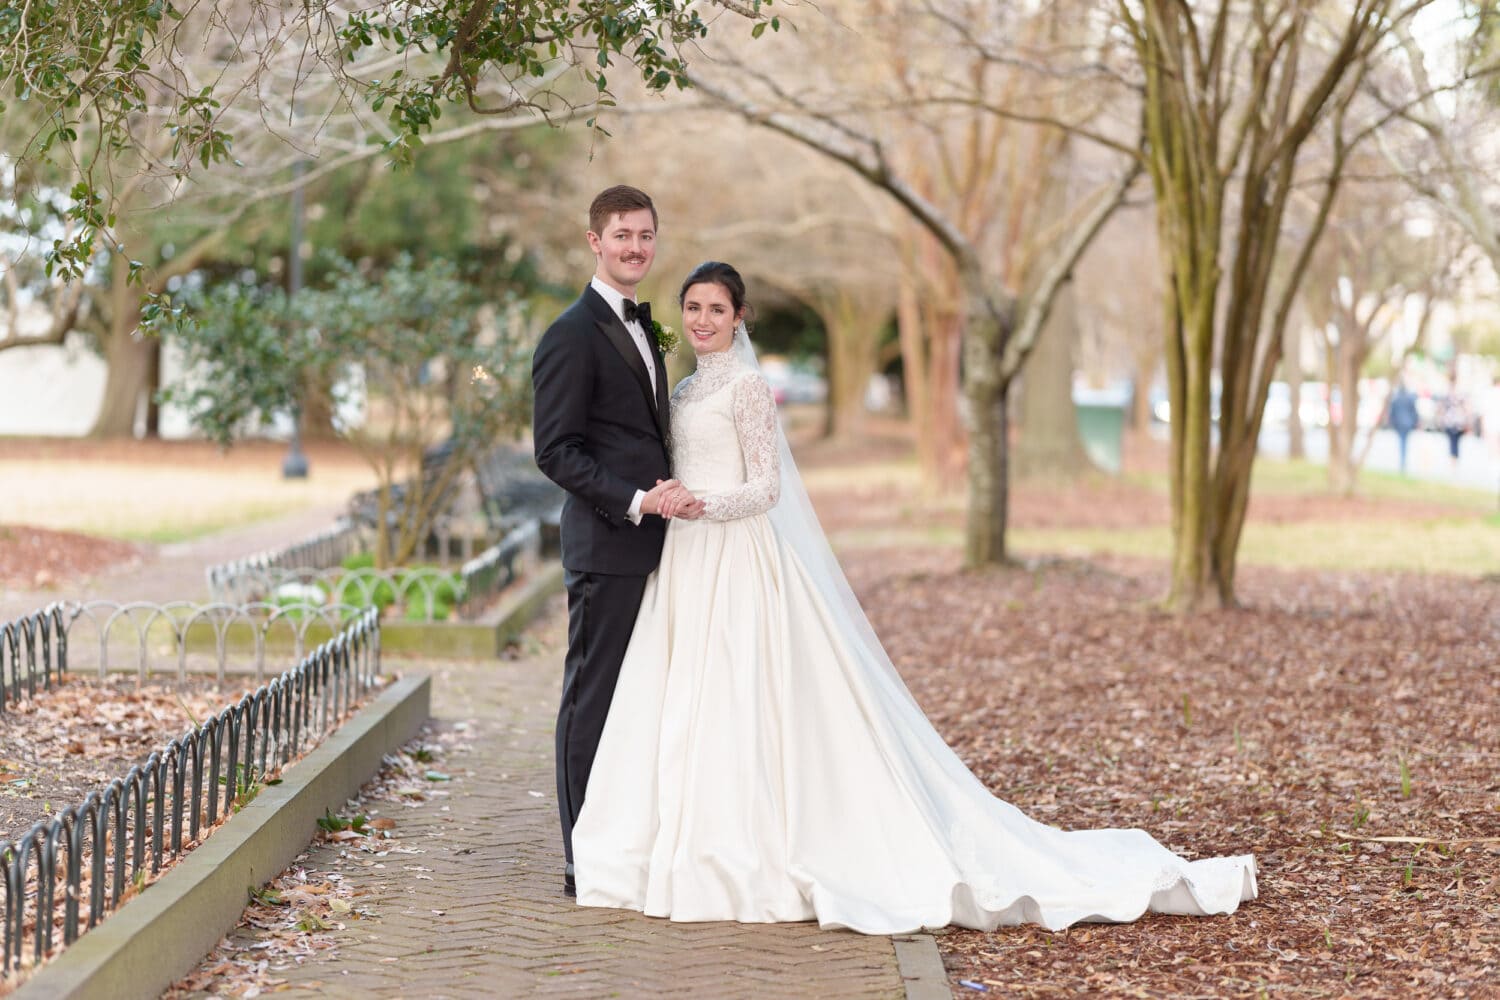 Bride and groom on the walkway in the park - Marion Square Charleston